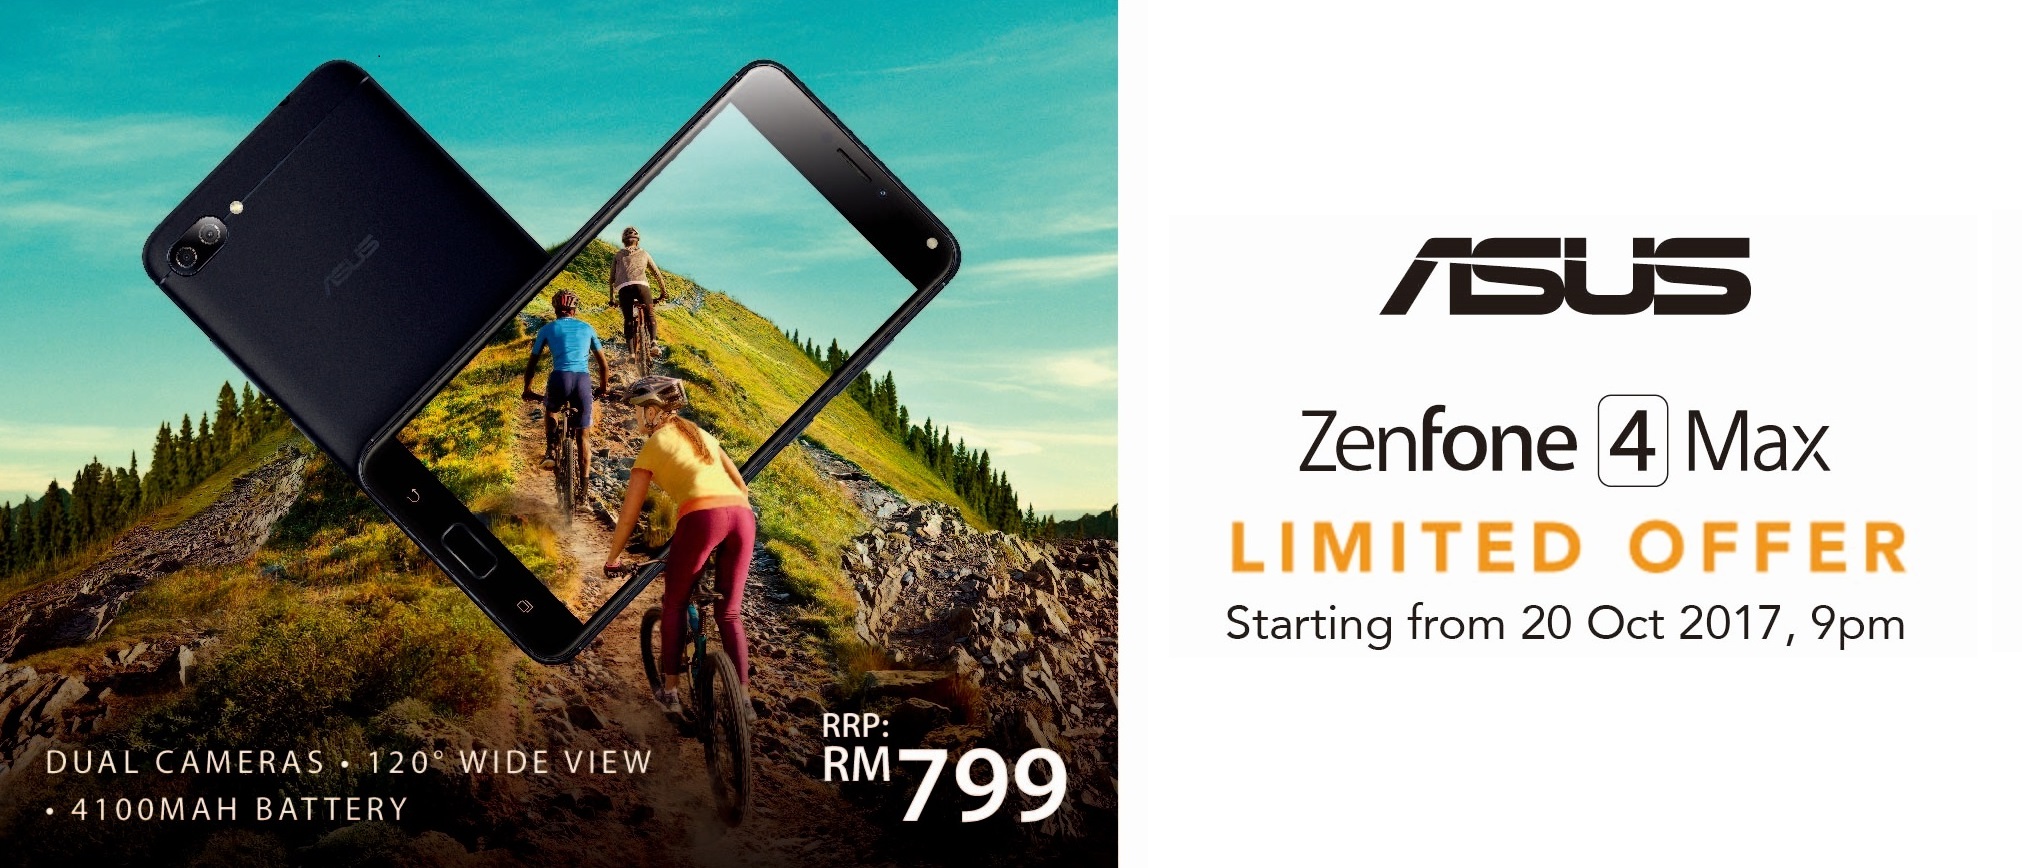 ASUS ZenFone 4 Max (ZC520KL) + exclusive bundle promo coming on 20 October 2017 for RM799